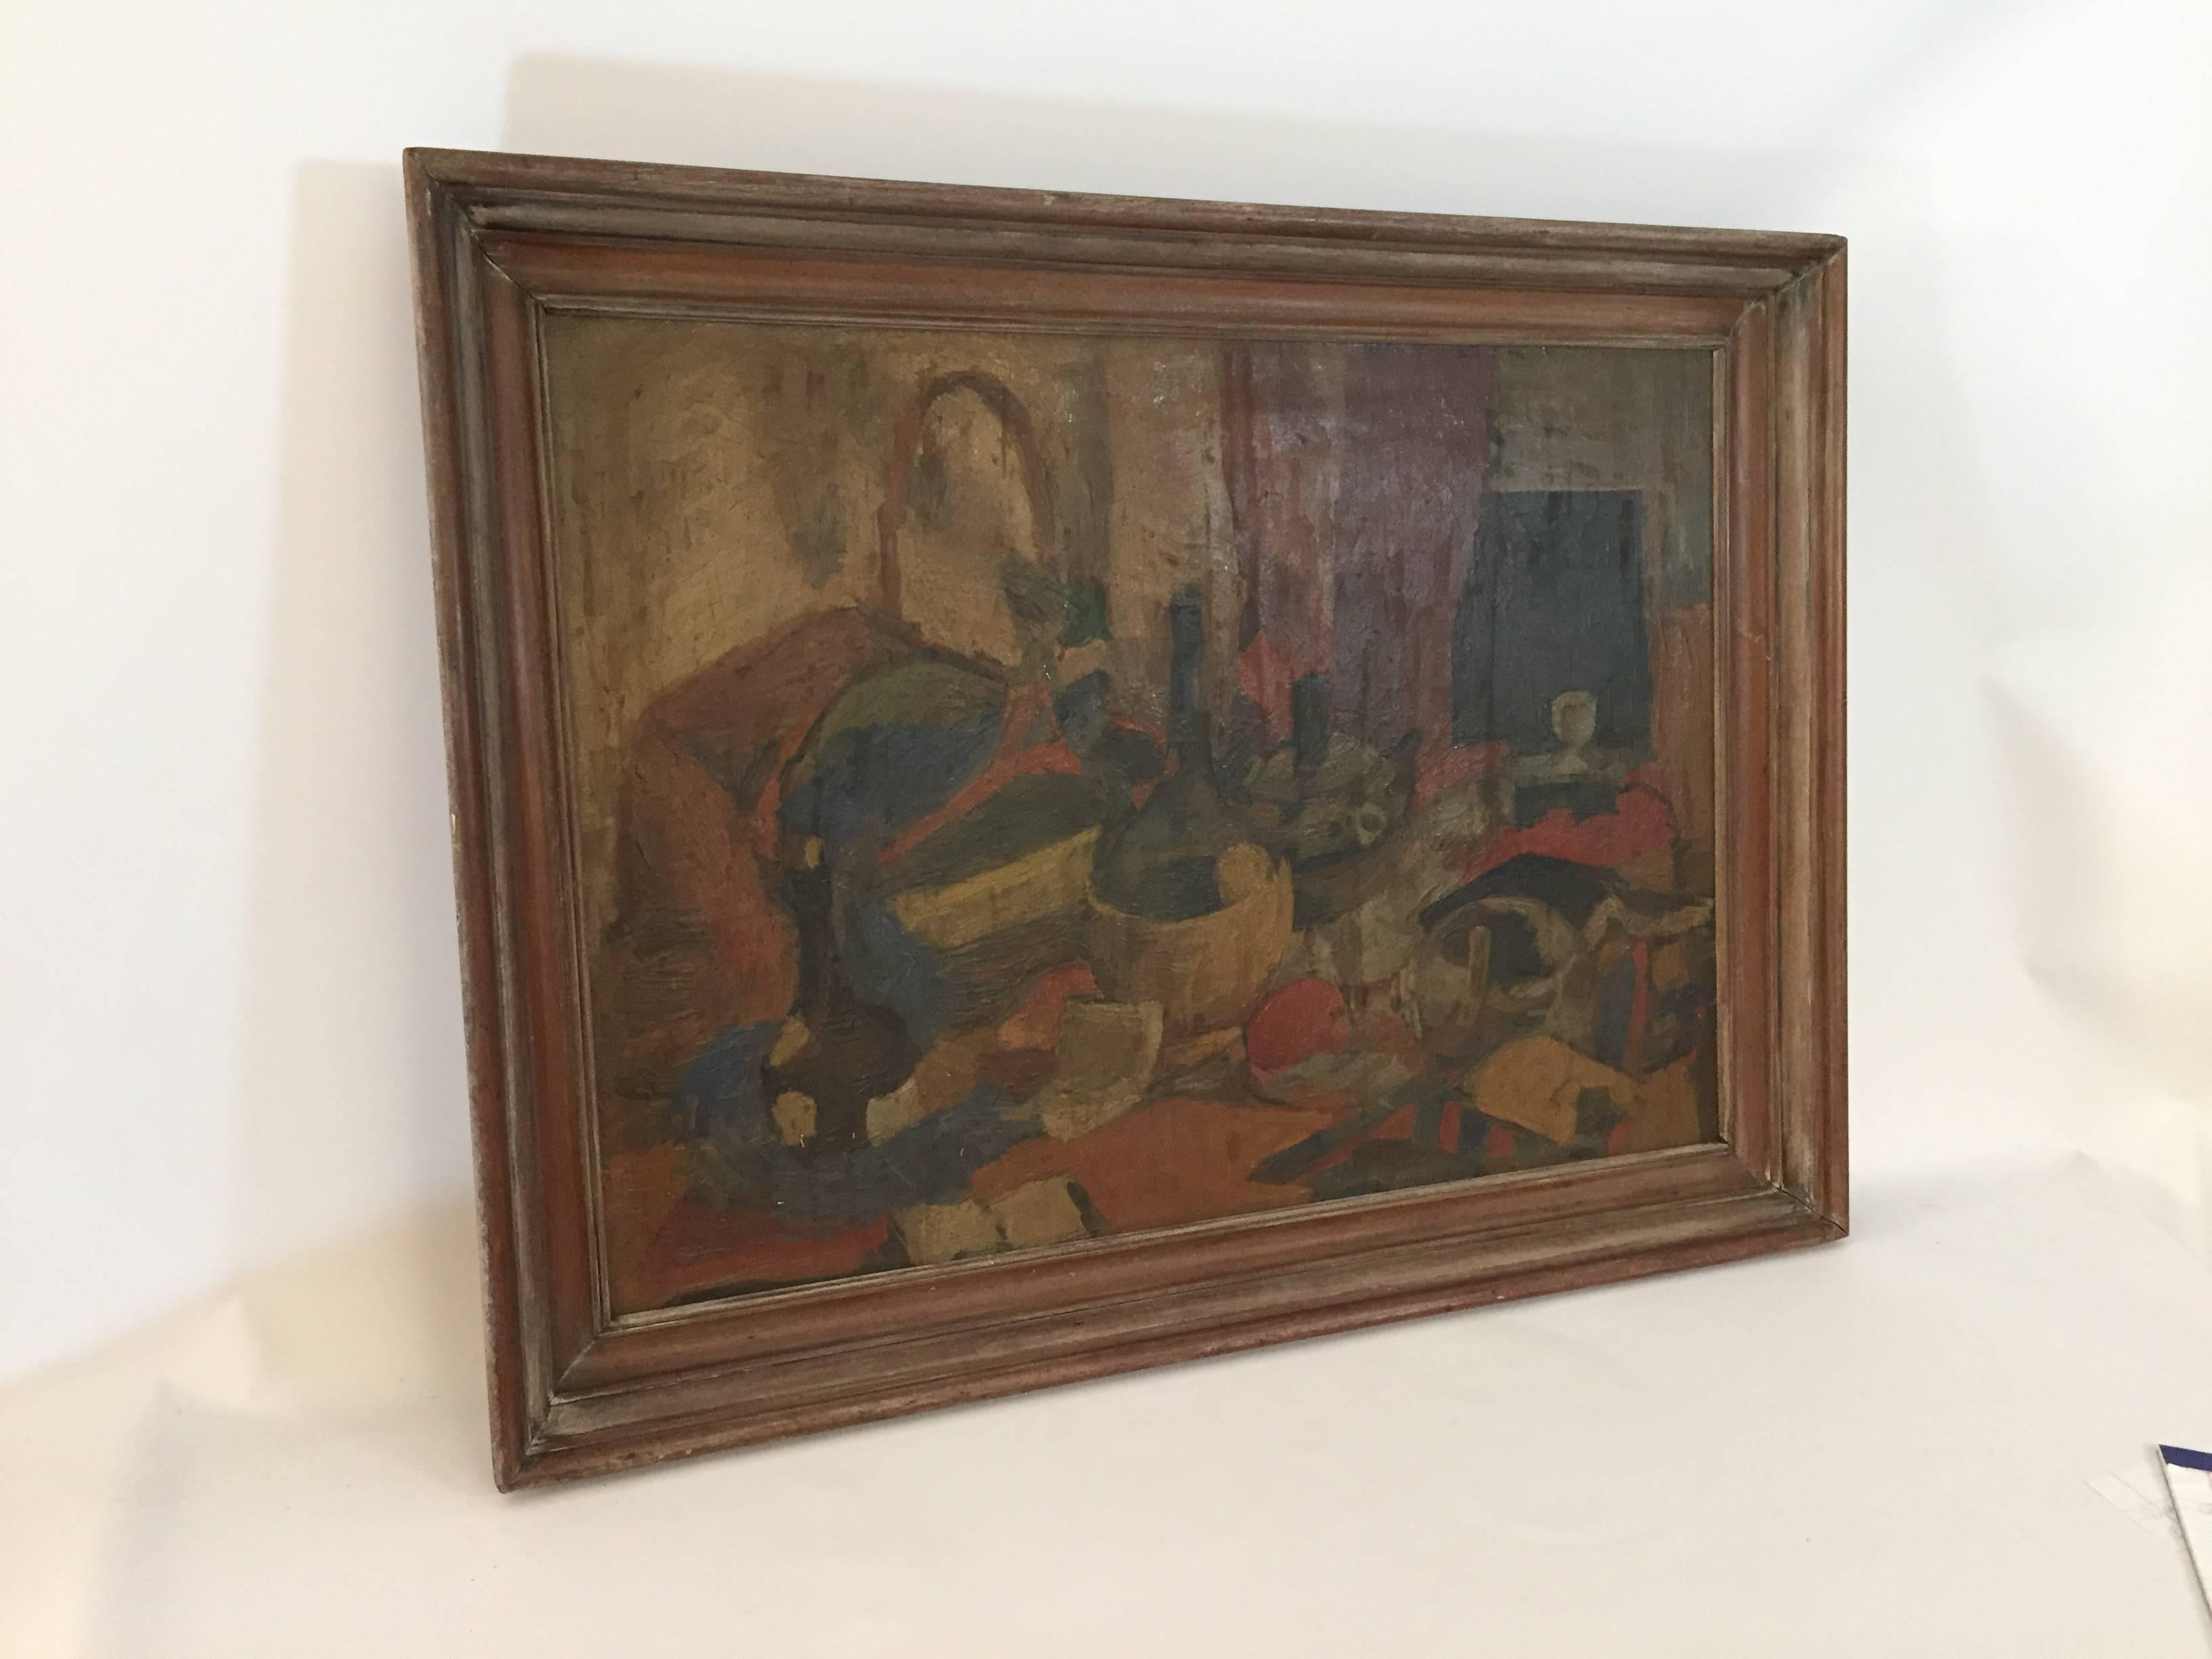 Finely executed oil paint on canvas by H.C. Meyer. Very dark and in need of a good cleaning. The colors will pop. Depicted are an array of tabletop items most notably fruit and a bottle of Chianti. Signed on back of canvas, H.C. Meyer '41. Framing